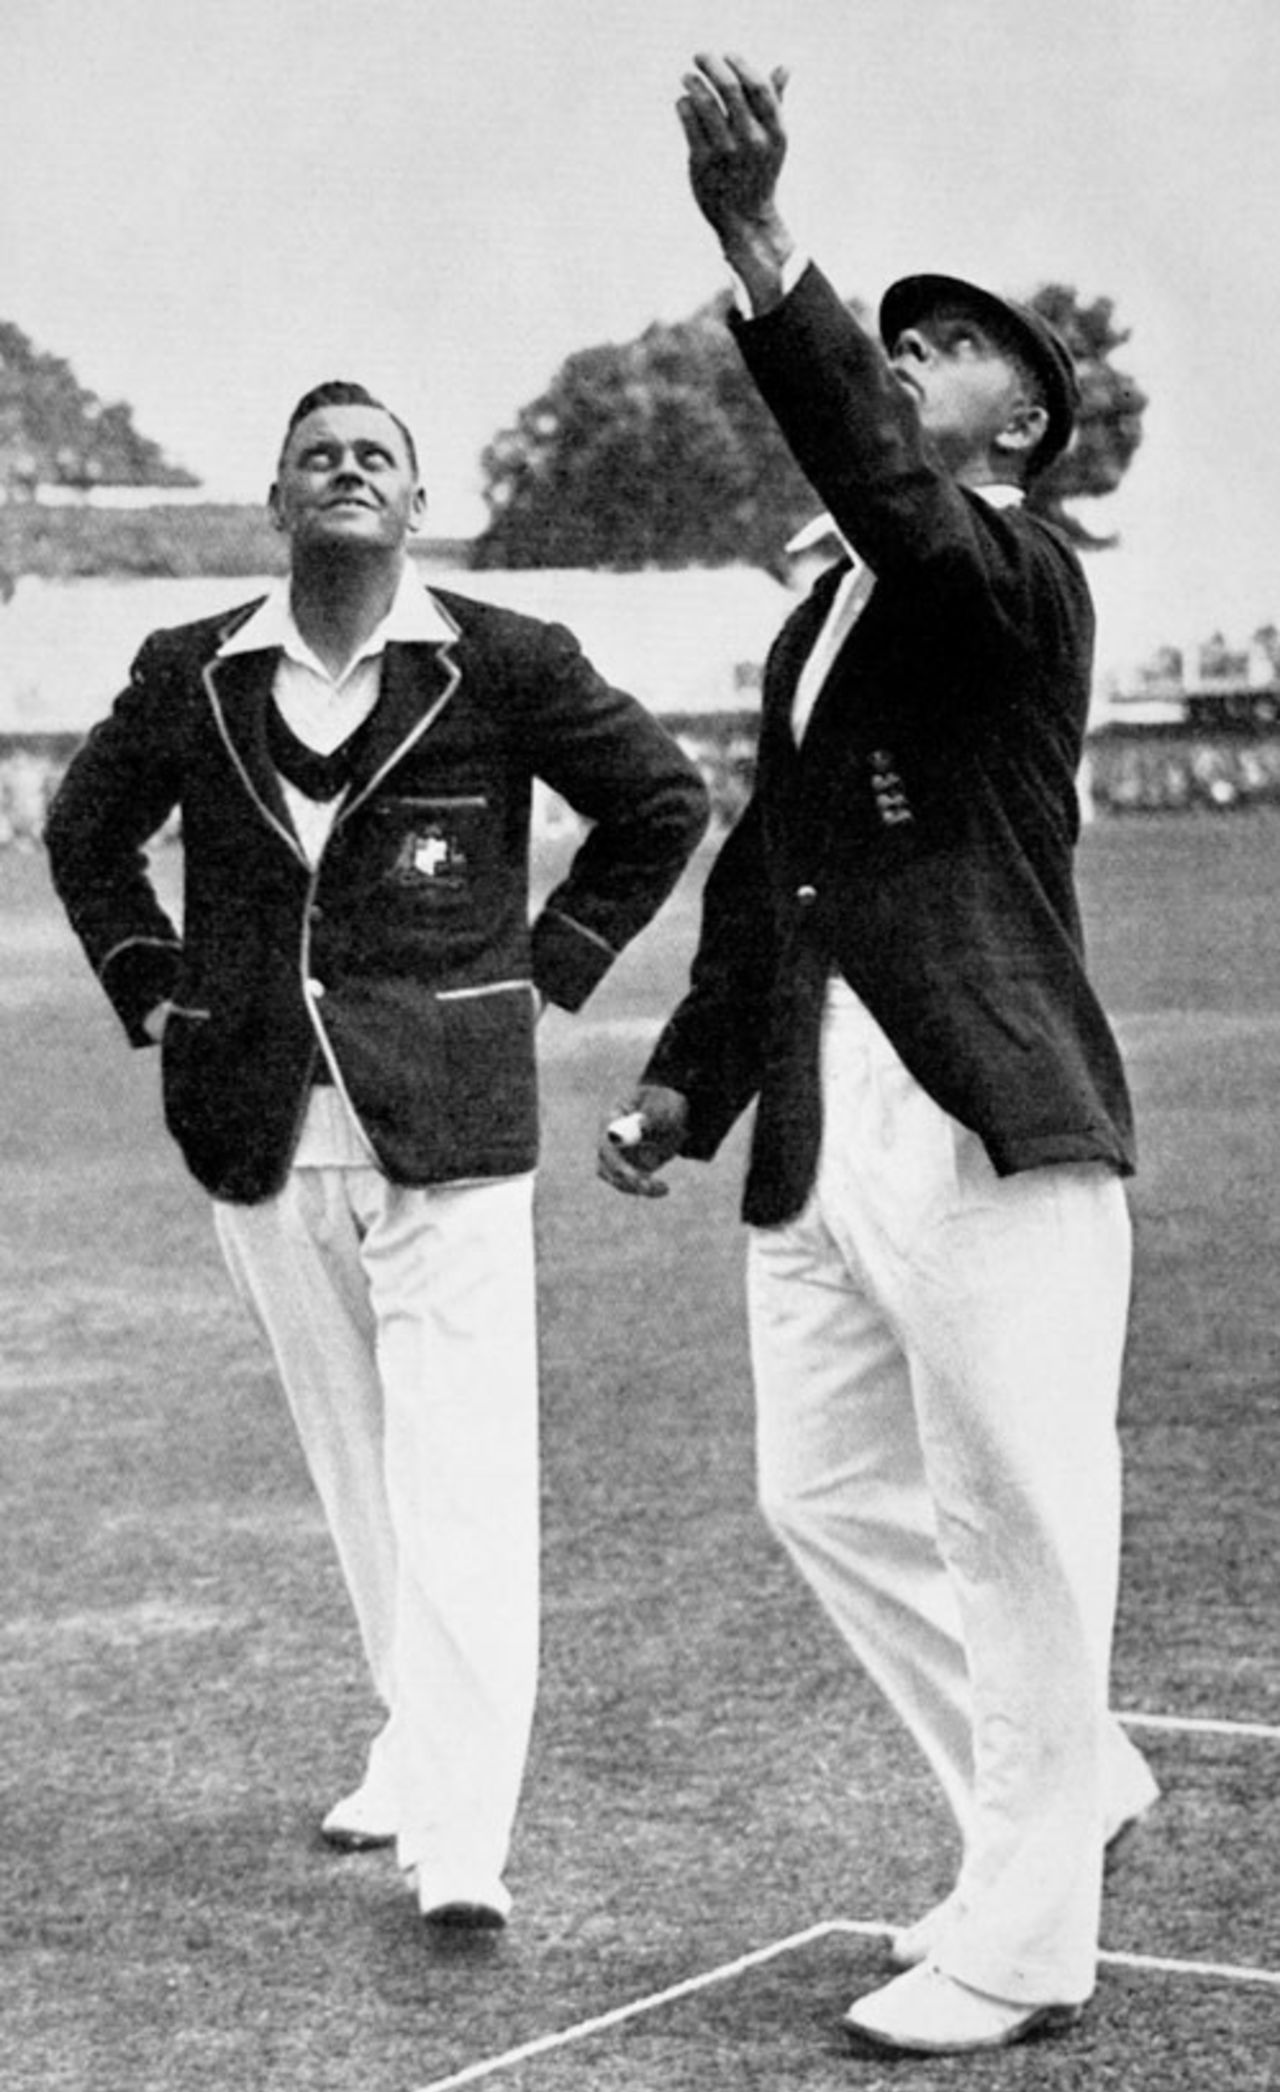 Bob Wyatt tosses and Bill Woodfull calls at the start of the 1934 Ashes Test, England v Australia, 2nd Test, Lord's, June 22. 1934